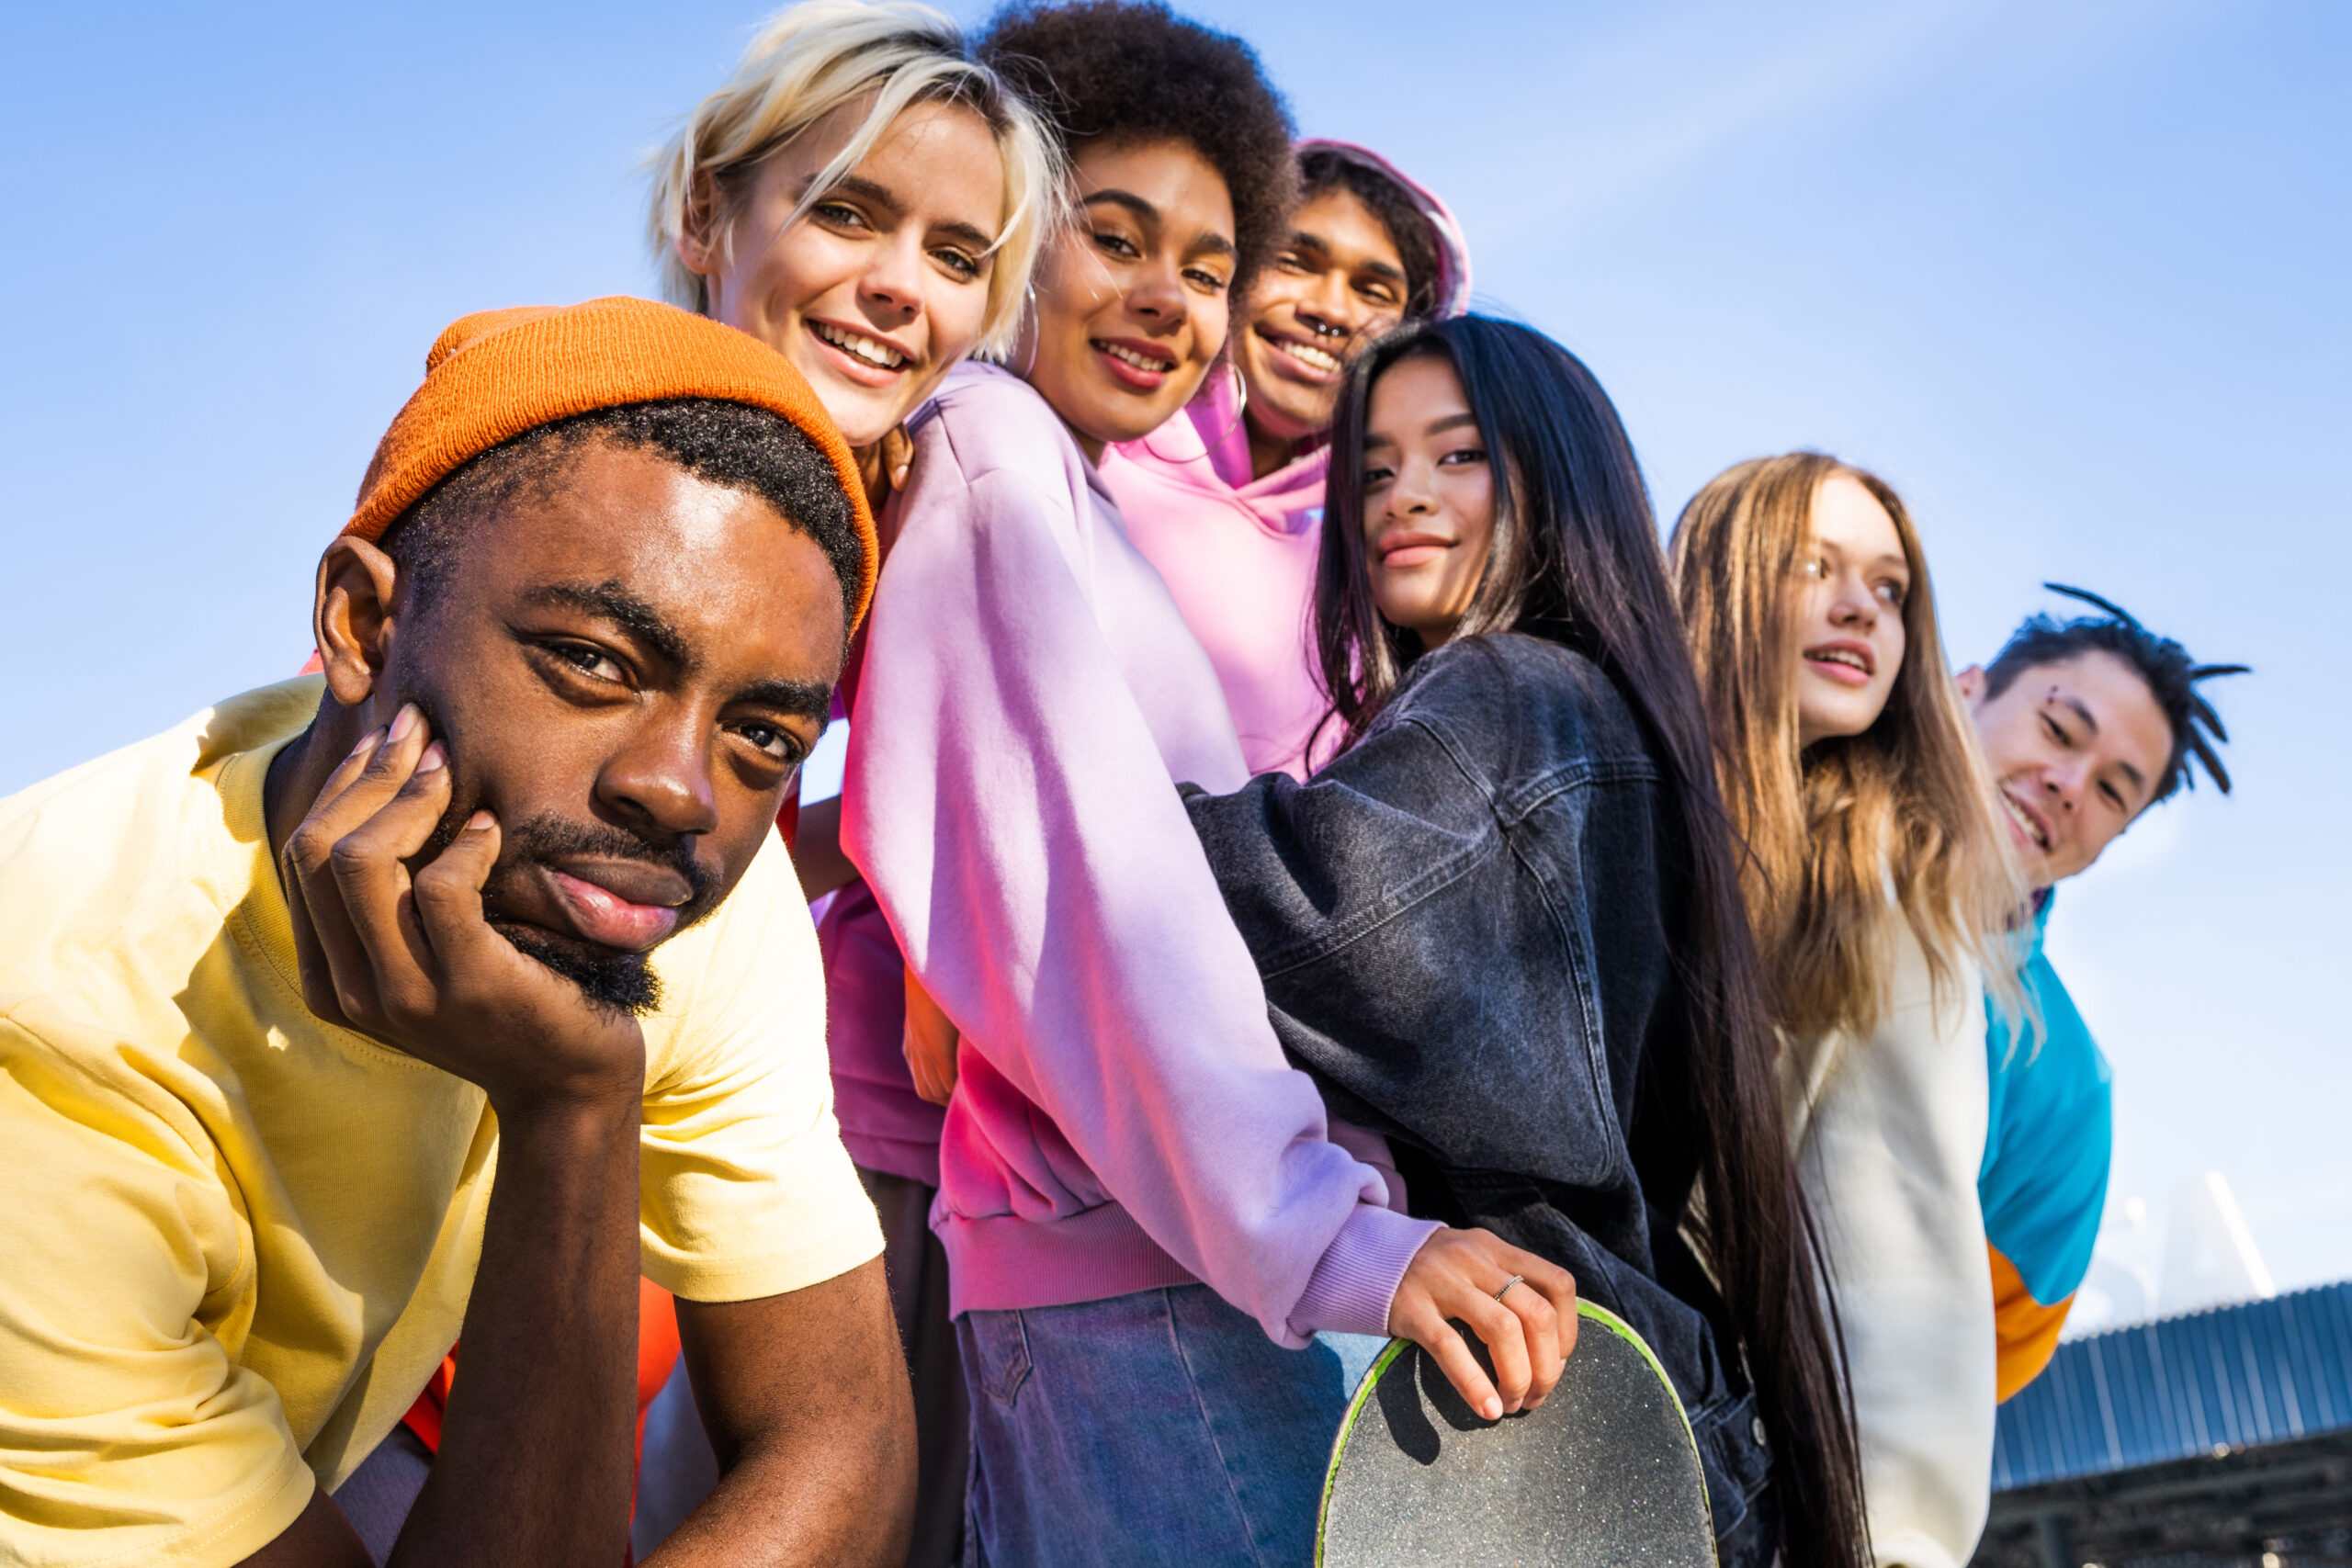 Multicultural group of young friends bonding outdoors and having fun - Stylish cool teens gathering at urban skate park